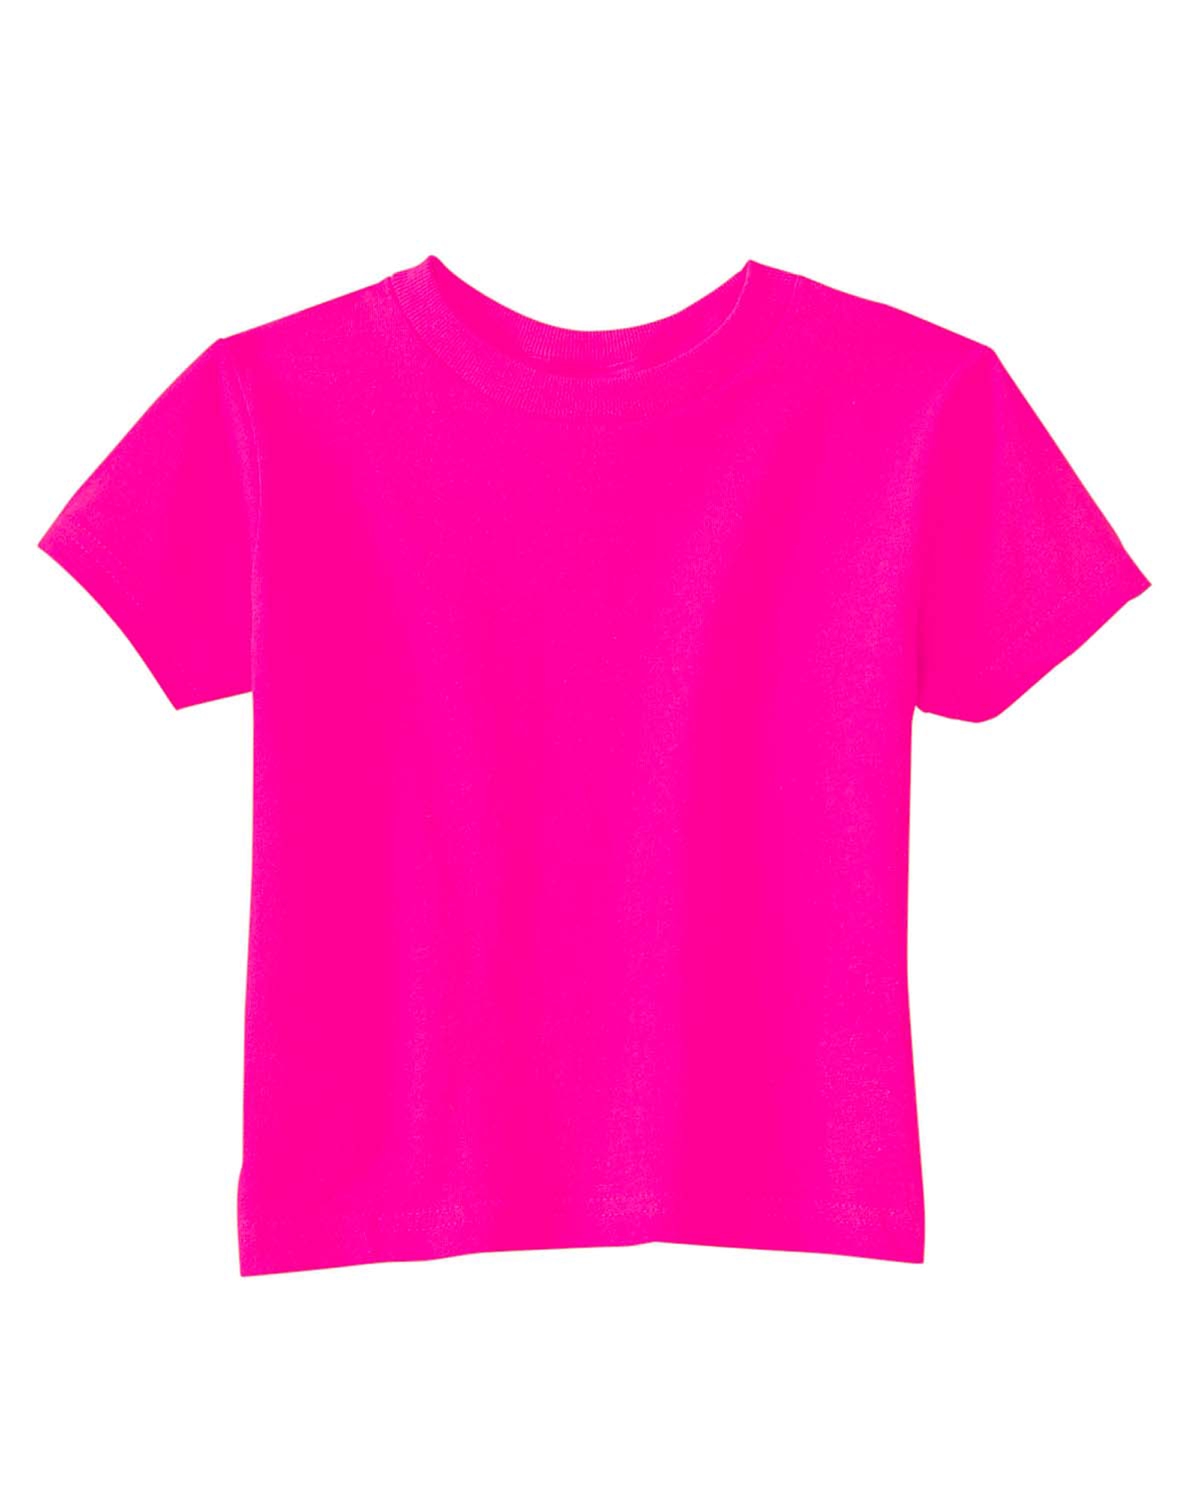 click to view HOT PINK